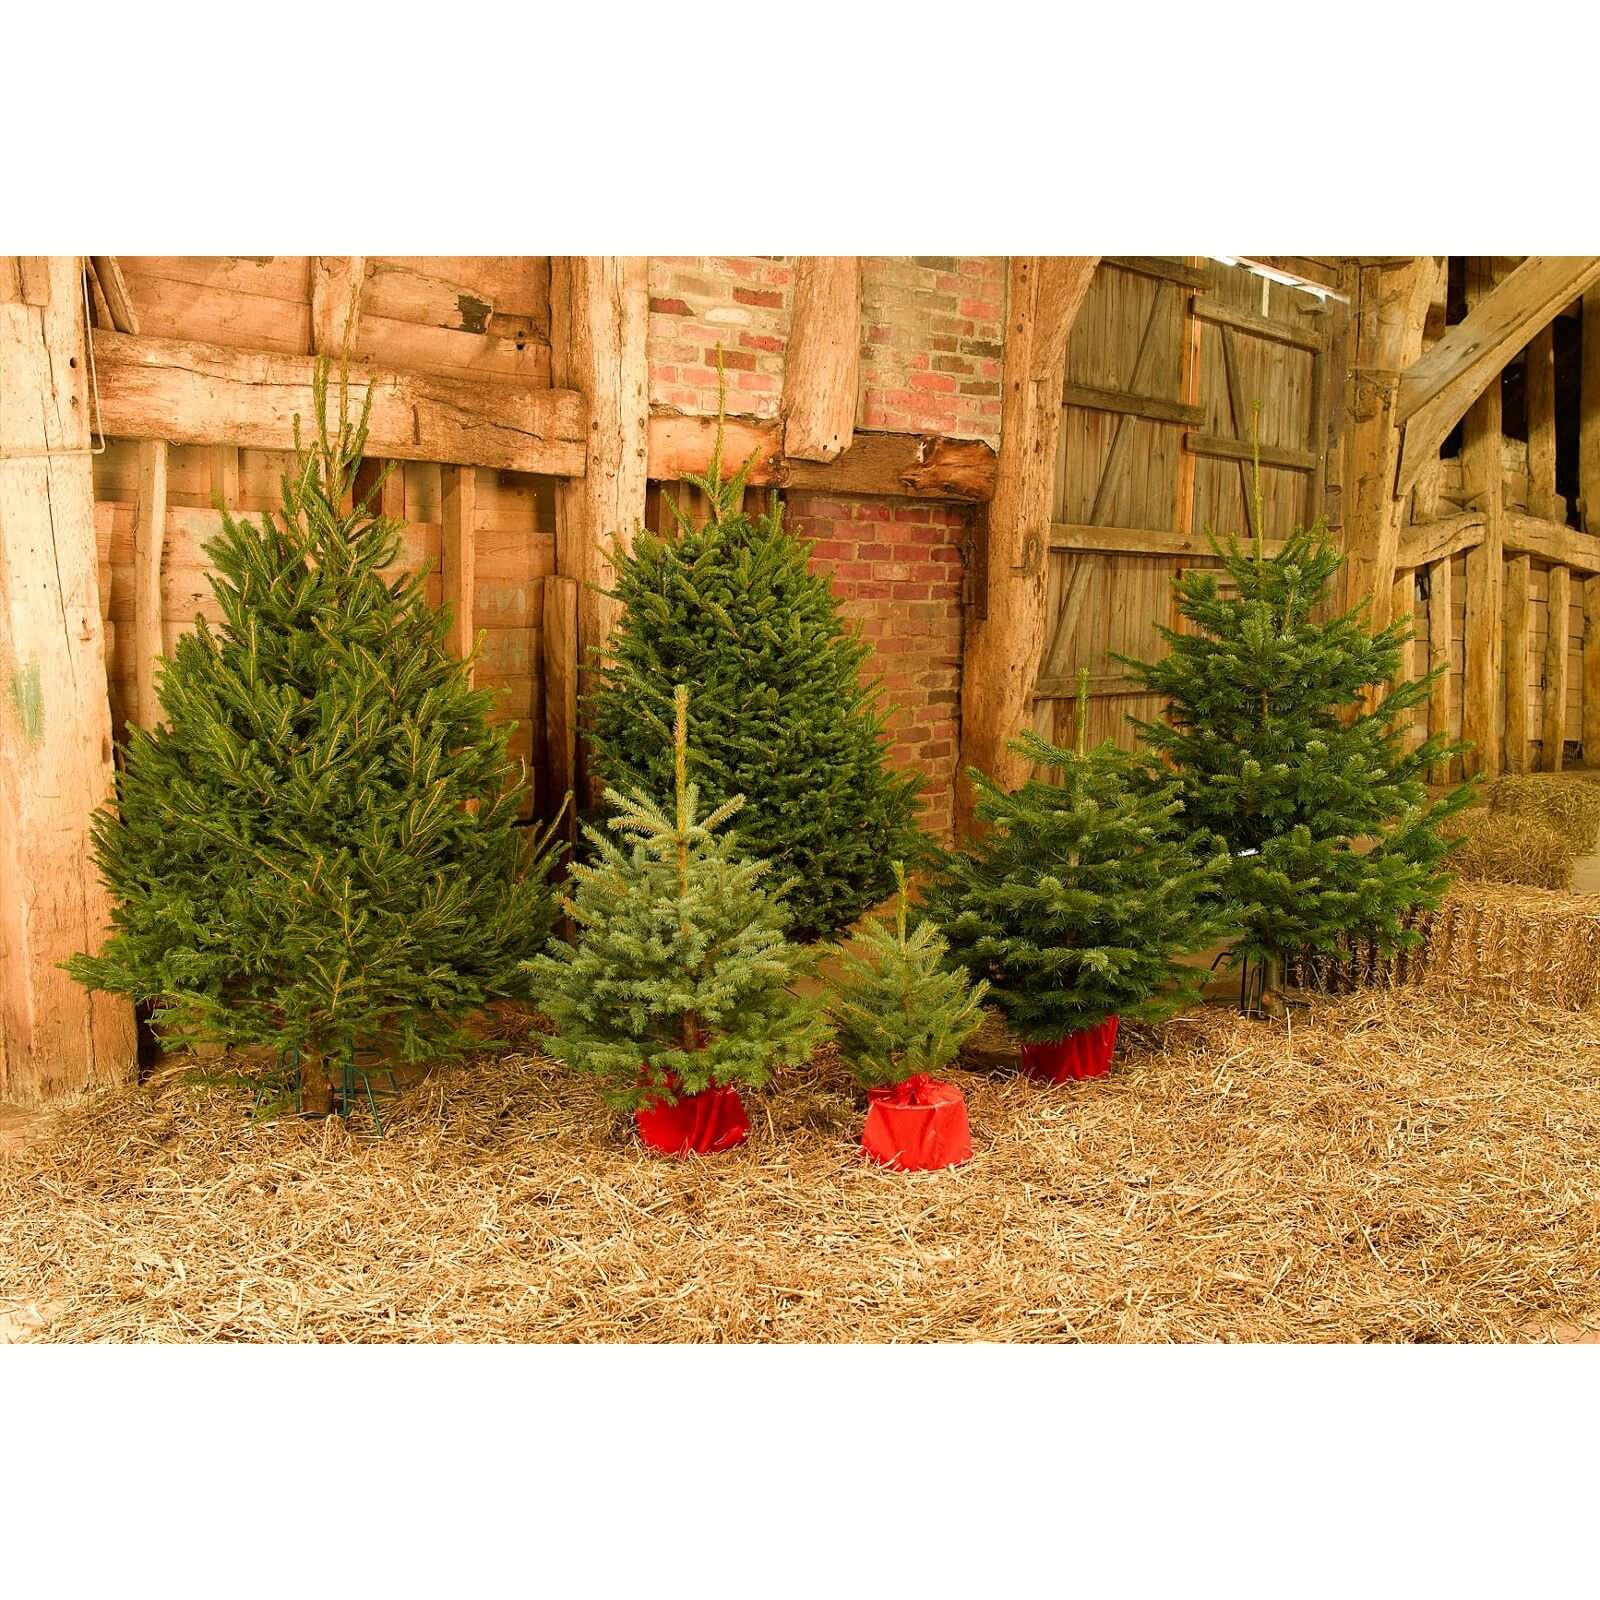 80-100cm (2.5-3ft) Living Pot Grown Blue Spruce Real Christmas Tree